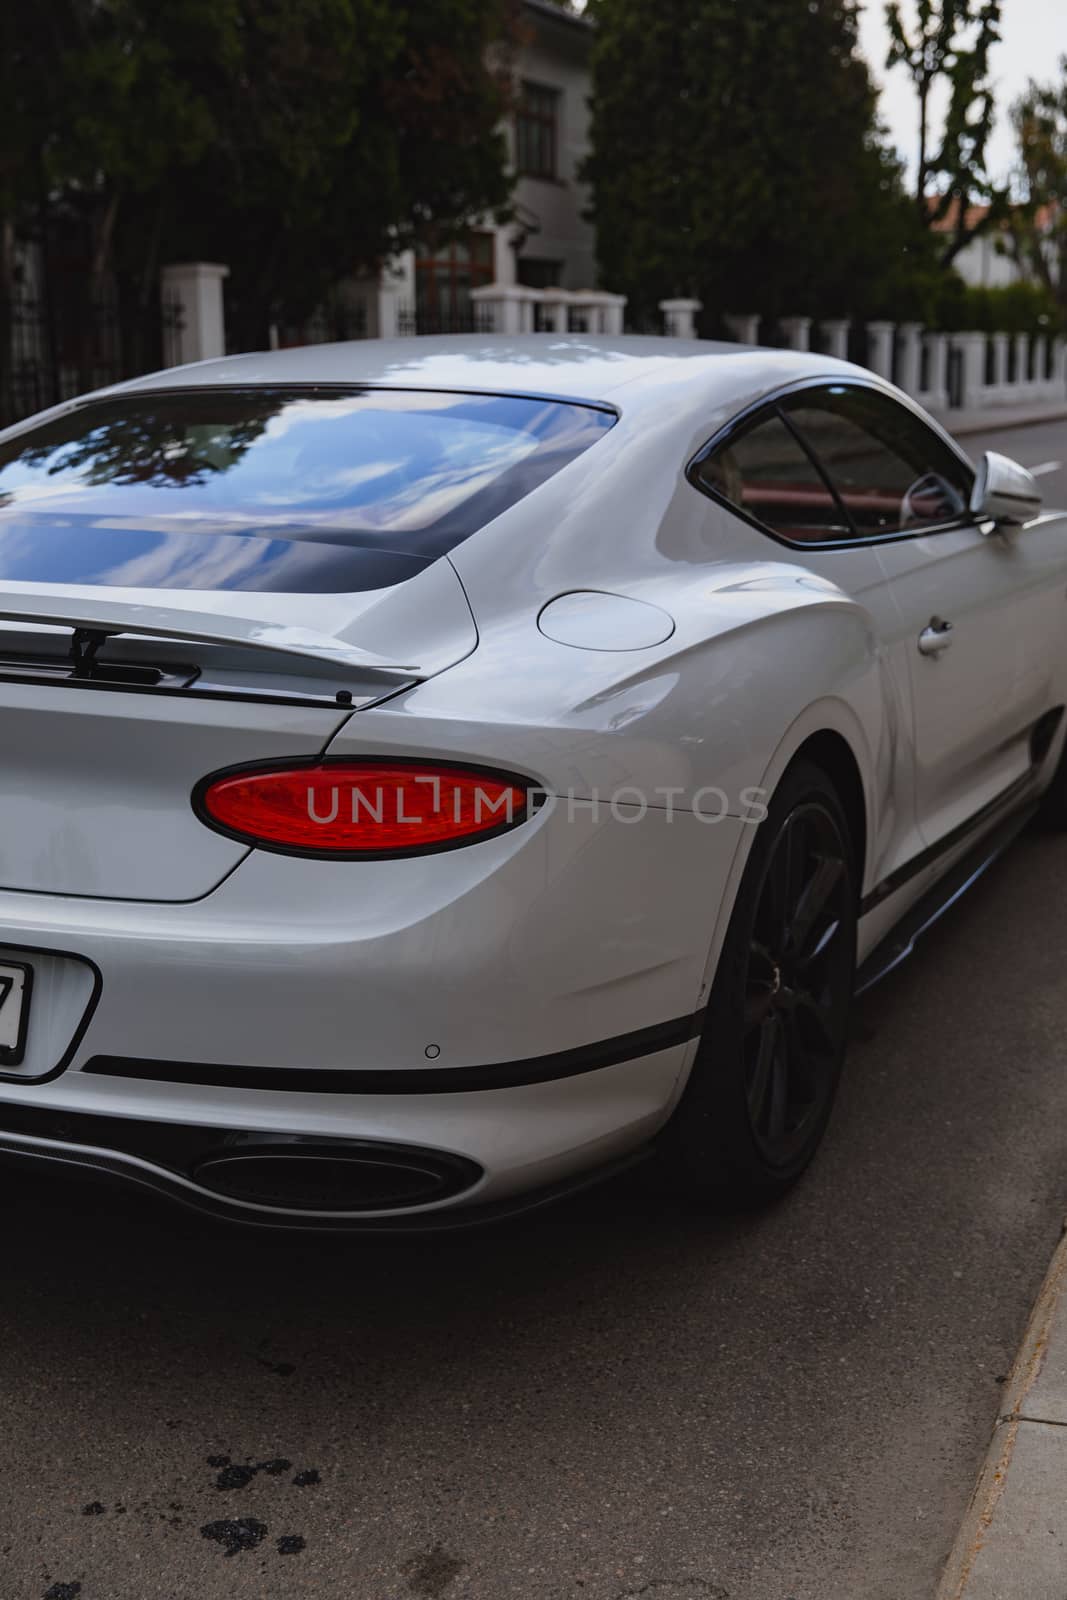 White brand new luxury sport cat Bentley Continental GT 2018 coupe by tema_rebel